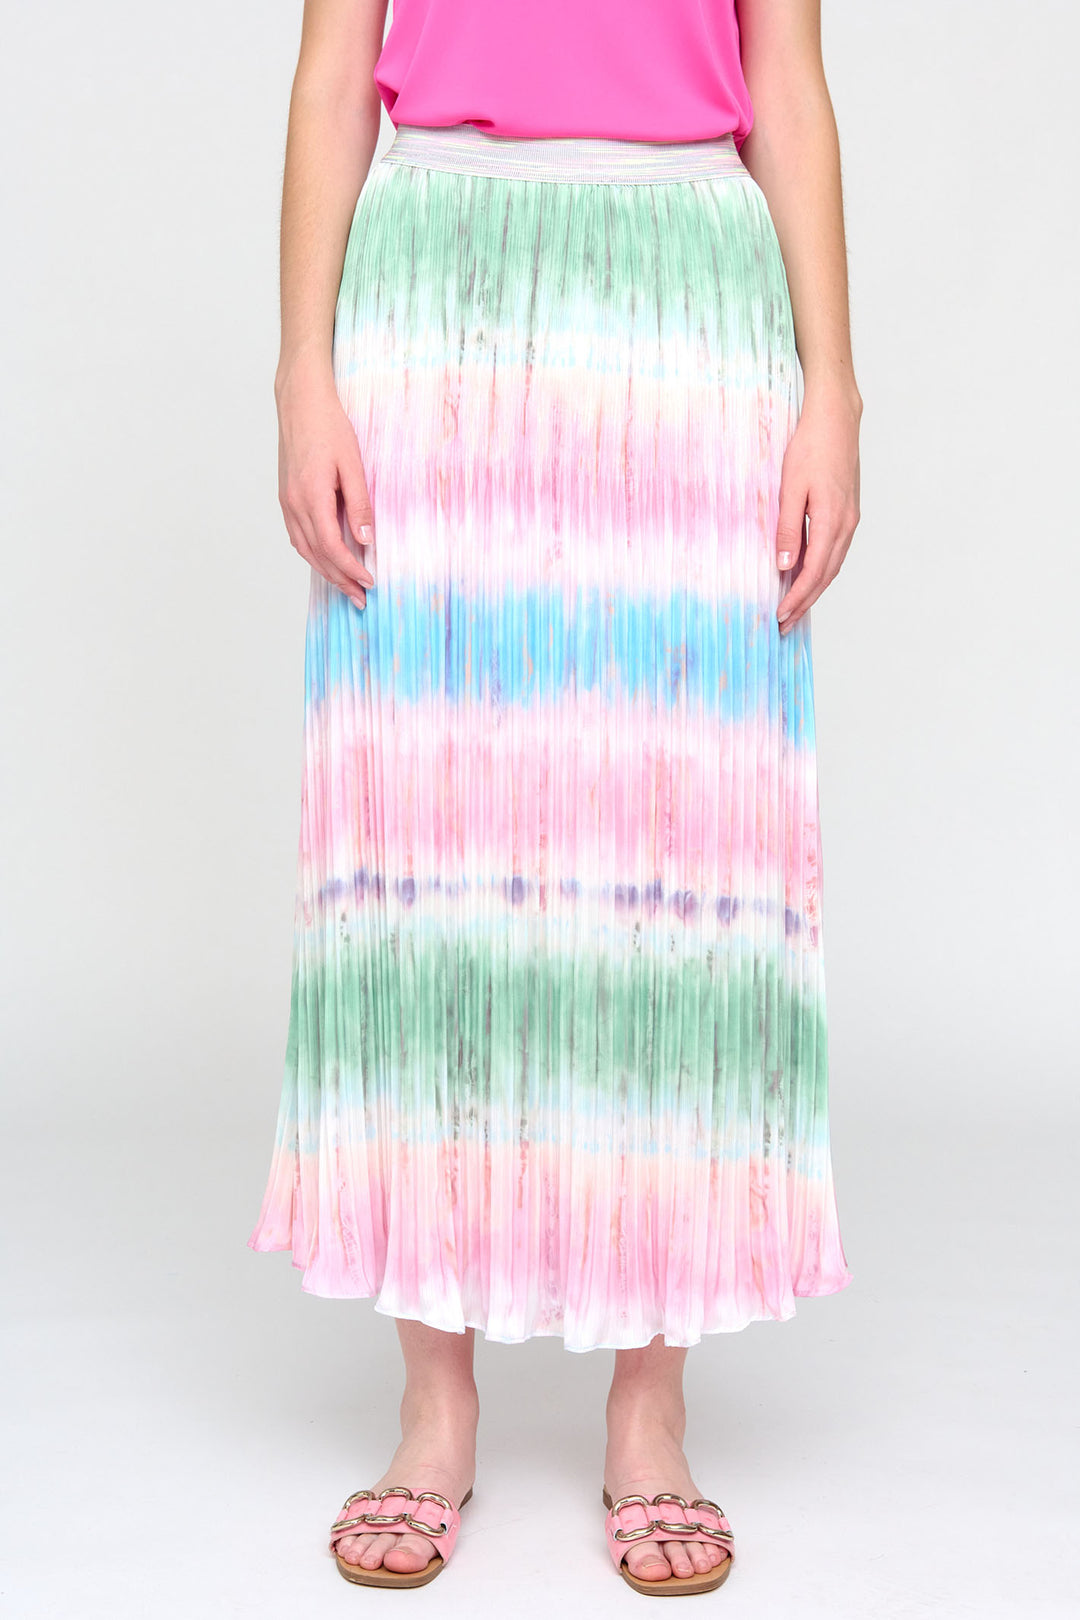 Bariloche Late Pink Tie-Dye Print Pleated Midi Skirt - Rouge Boutique Inverness